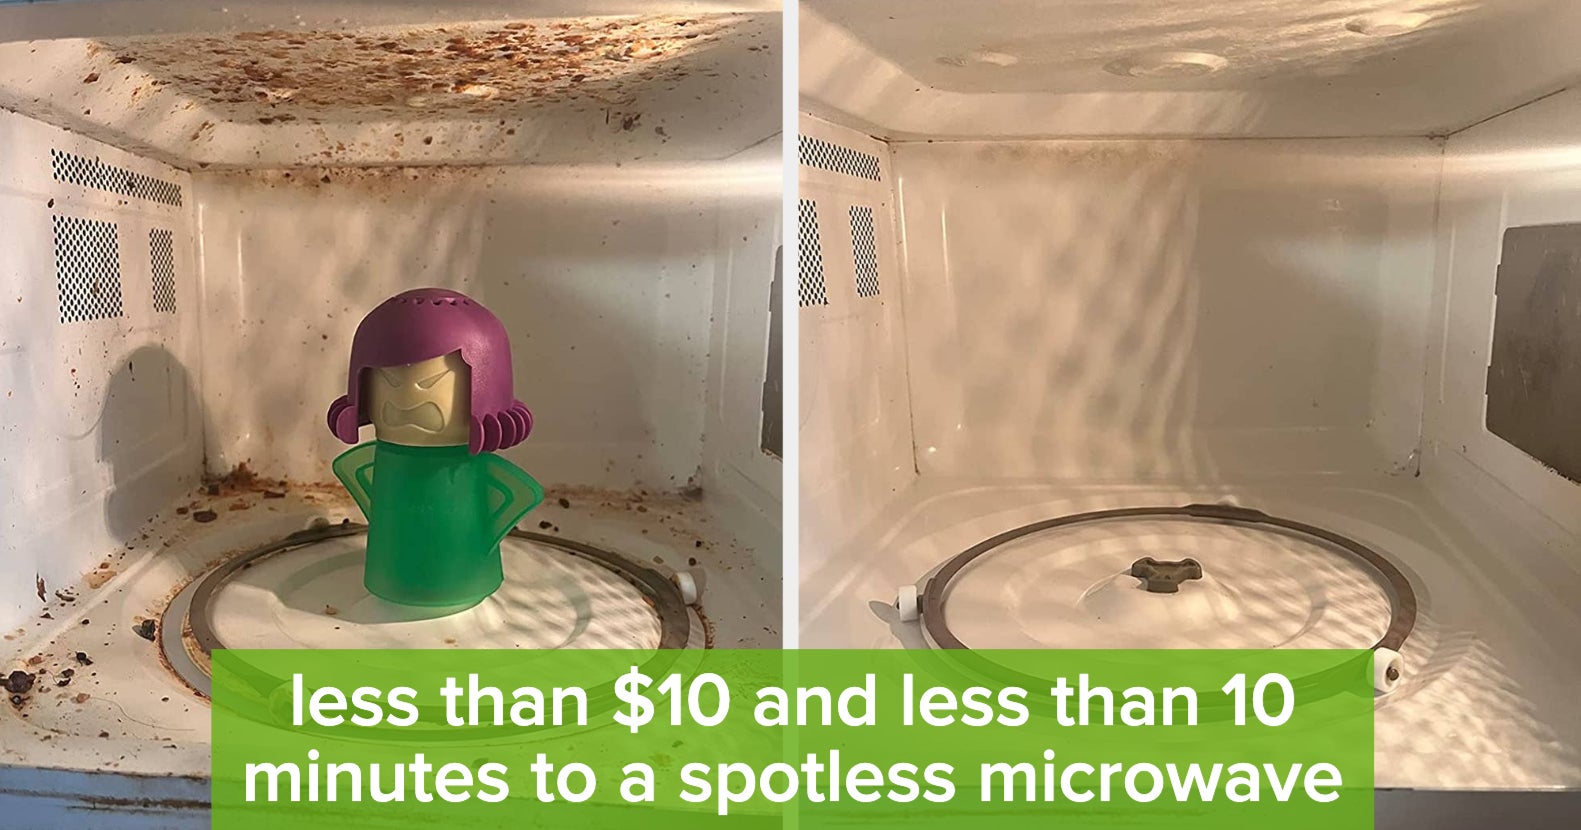 This $8 'Magical' Tool Makes Cleaning Your Microwave Easy and